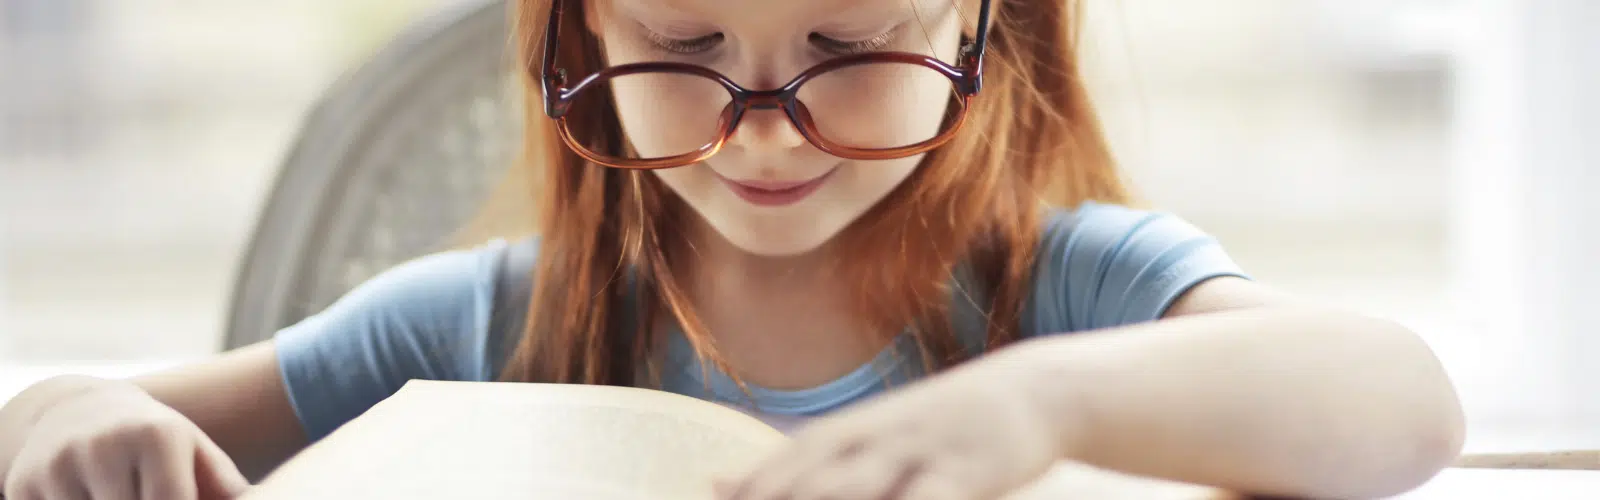 How to teach your child to read: 6 foolproof tips!